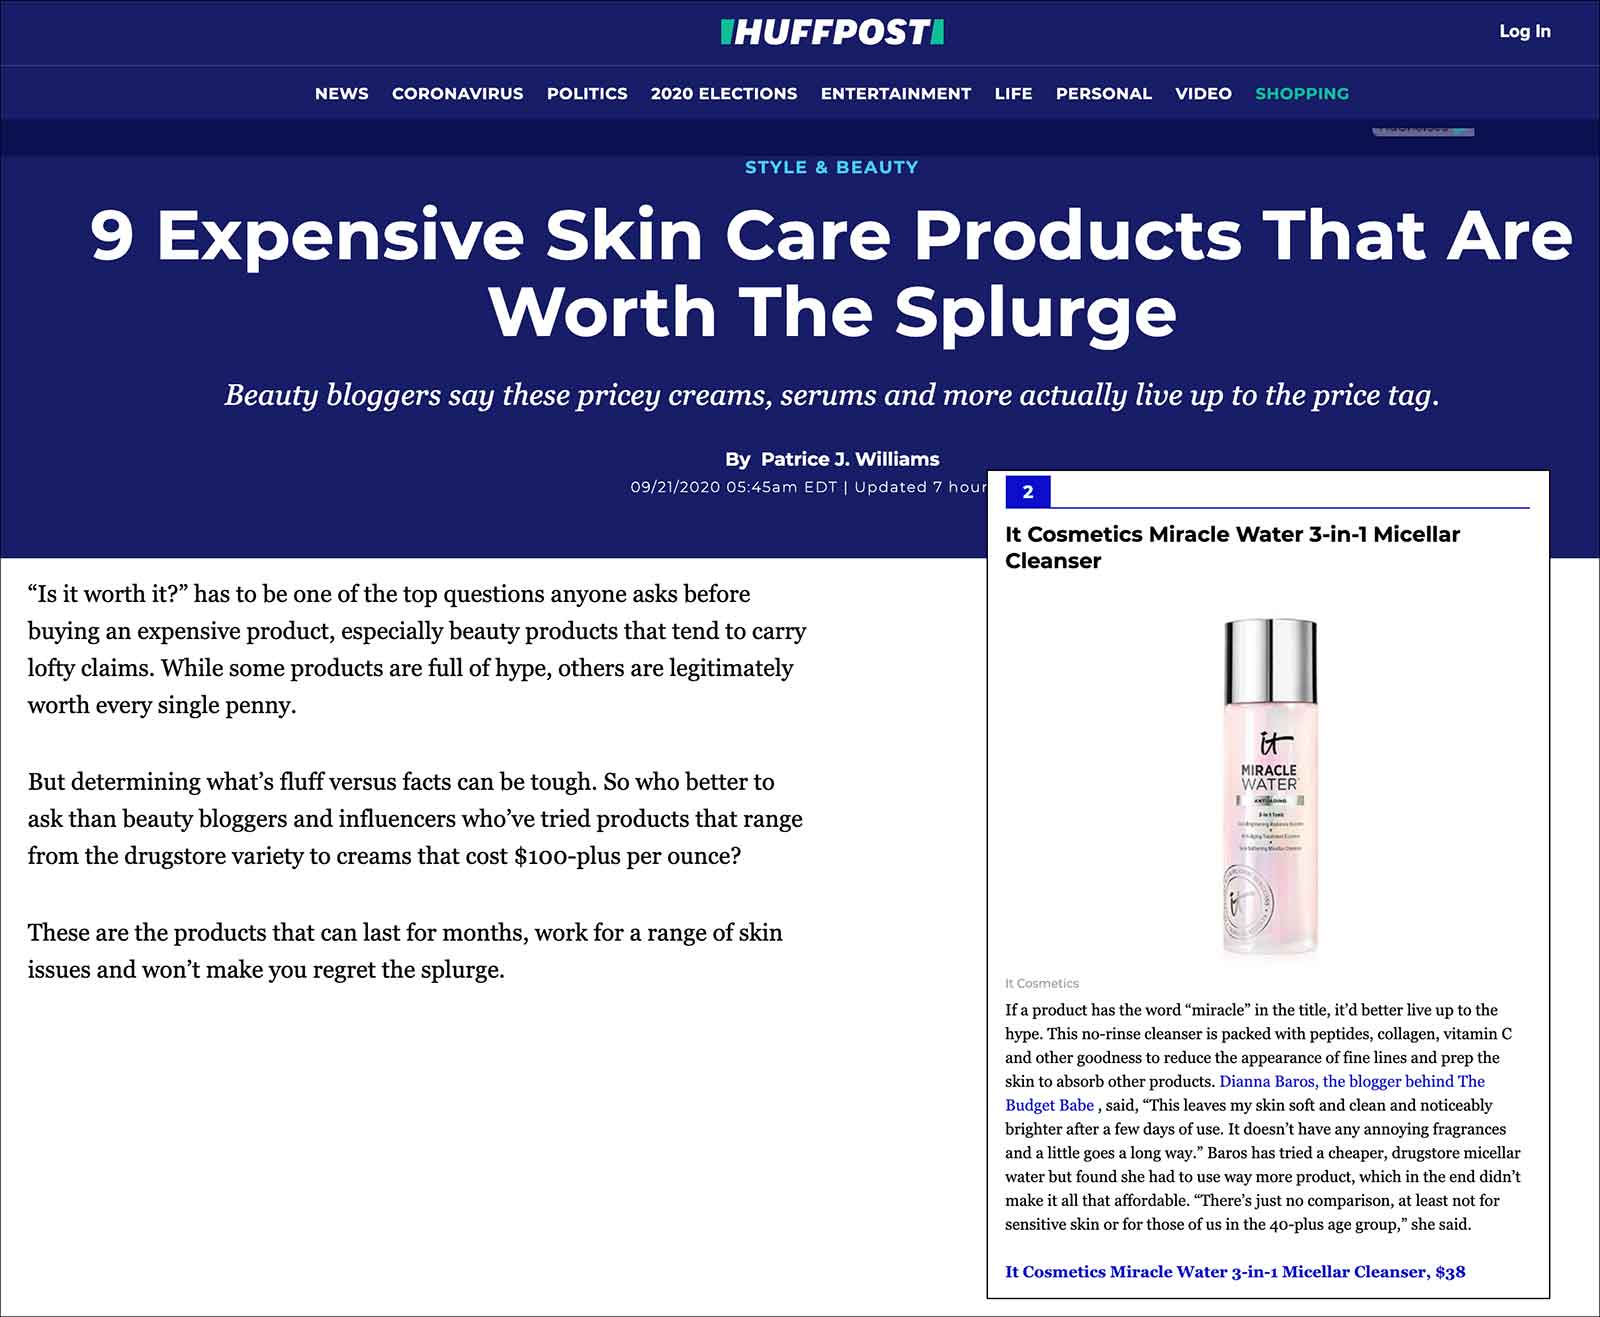 The Budget Babe's Dianna Baros talks to HuffPost about beauty buys worth the splurge.